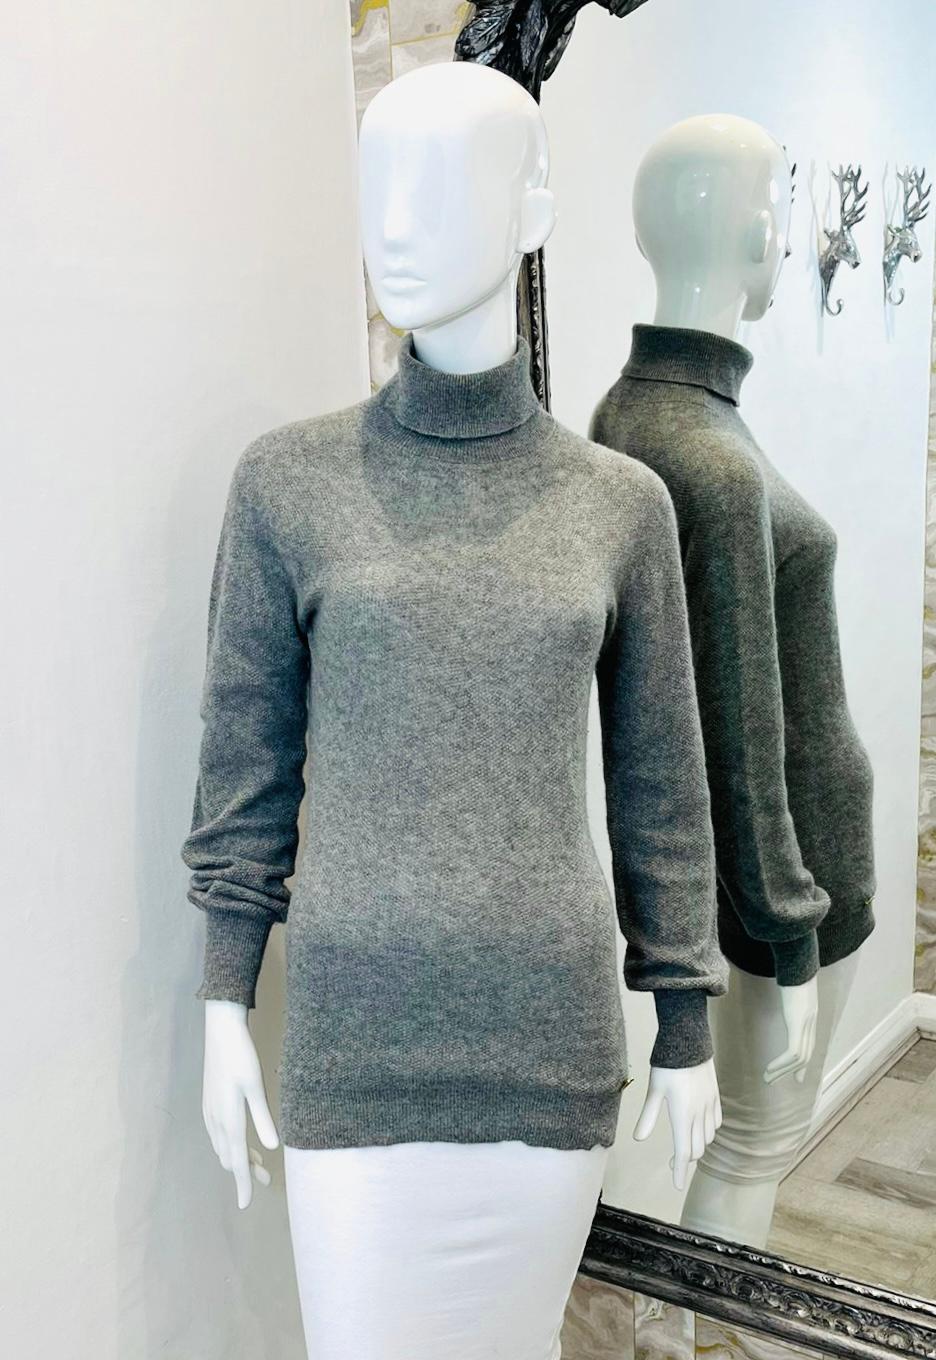 Gucci Cashmere Roll Neck Jumper

Grey jumper designed with roll neckline and ribbed cuffs.

Featuring fitted silhouette and gold 'Gucci' logo plaque to the side.

Size –  L

Condition –  Very Good

Composition – 100% Cashmere